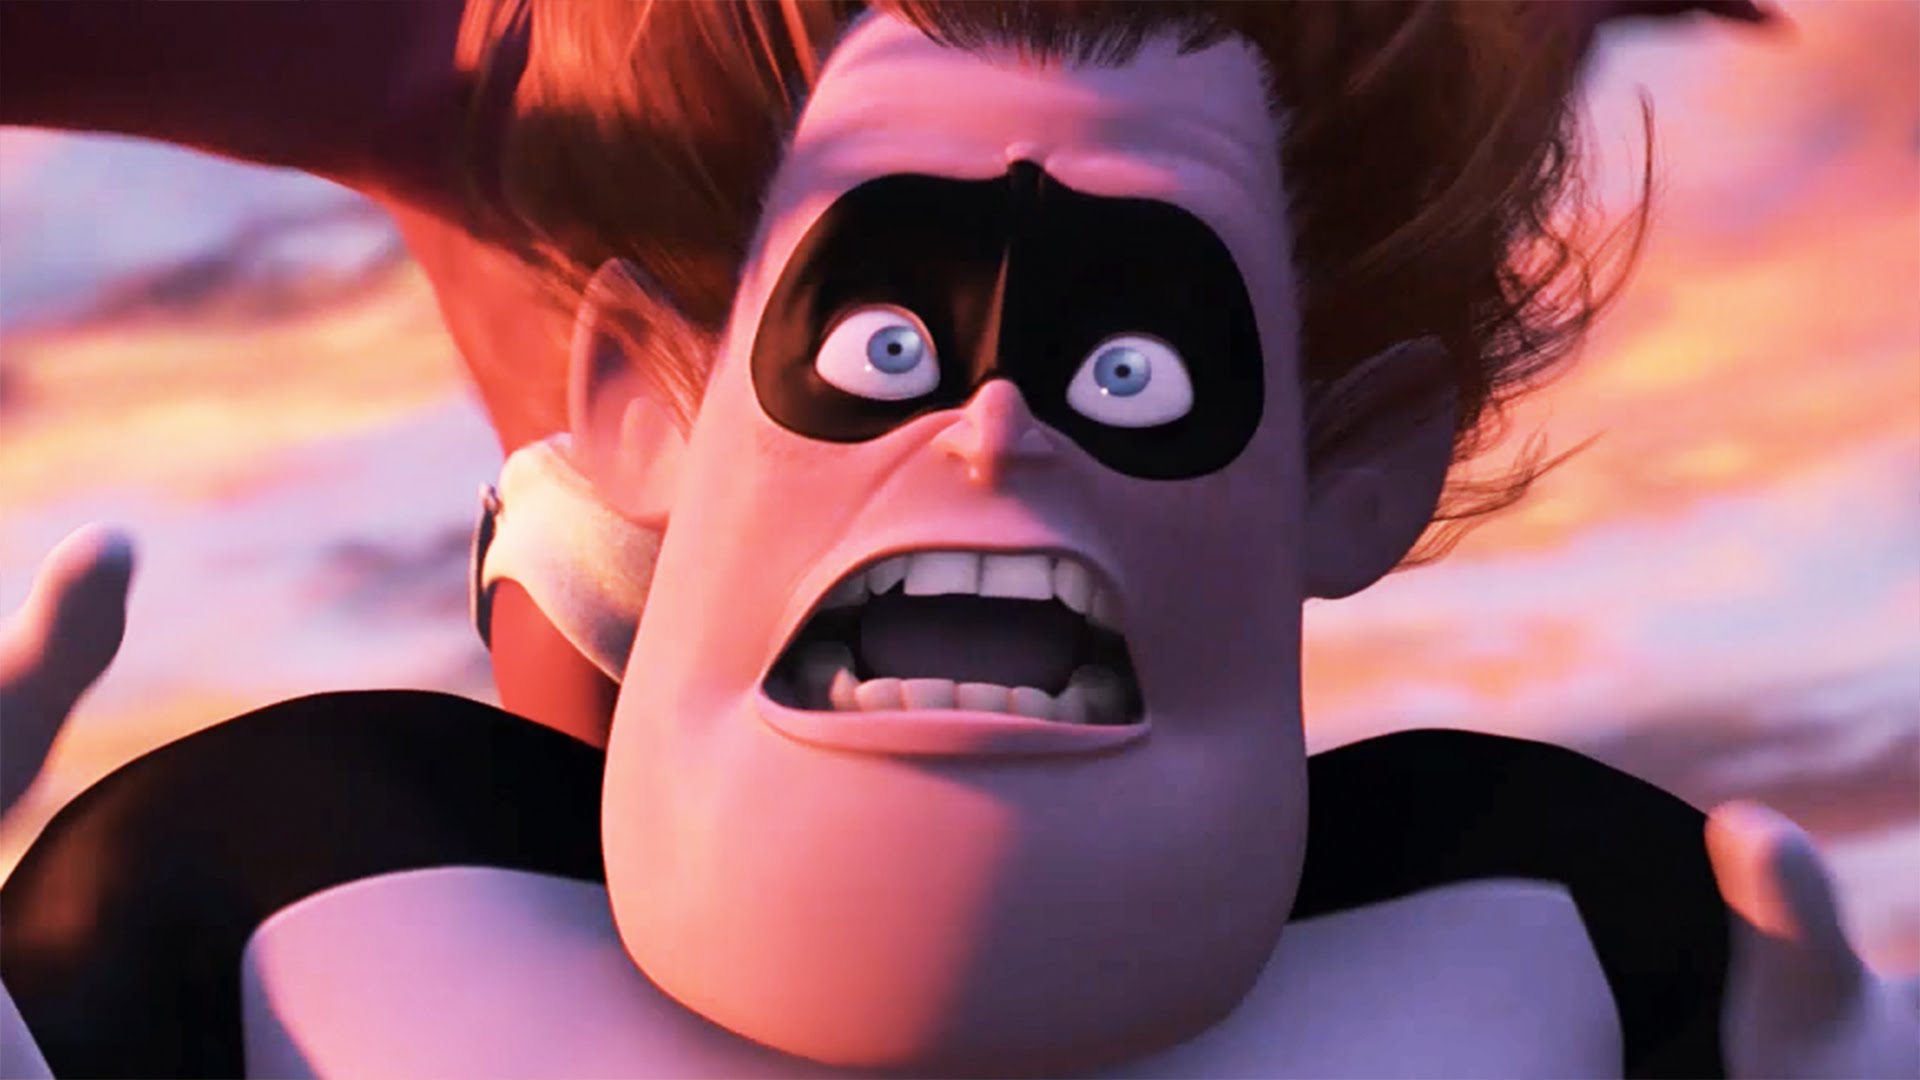 This is a picture of Syndrome looking scared at the end of the Incredibles film